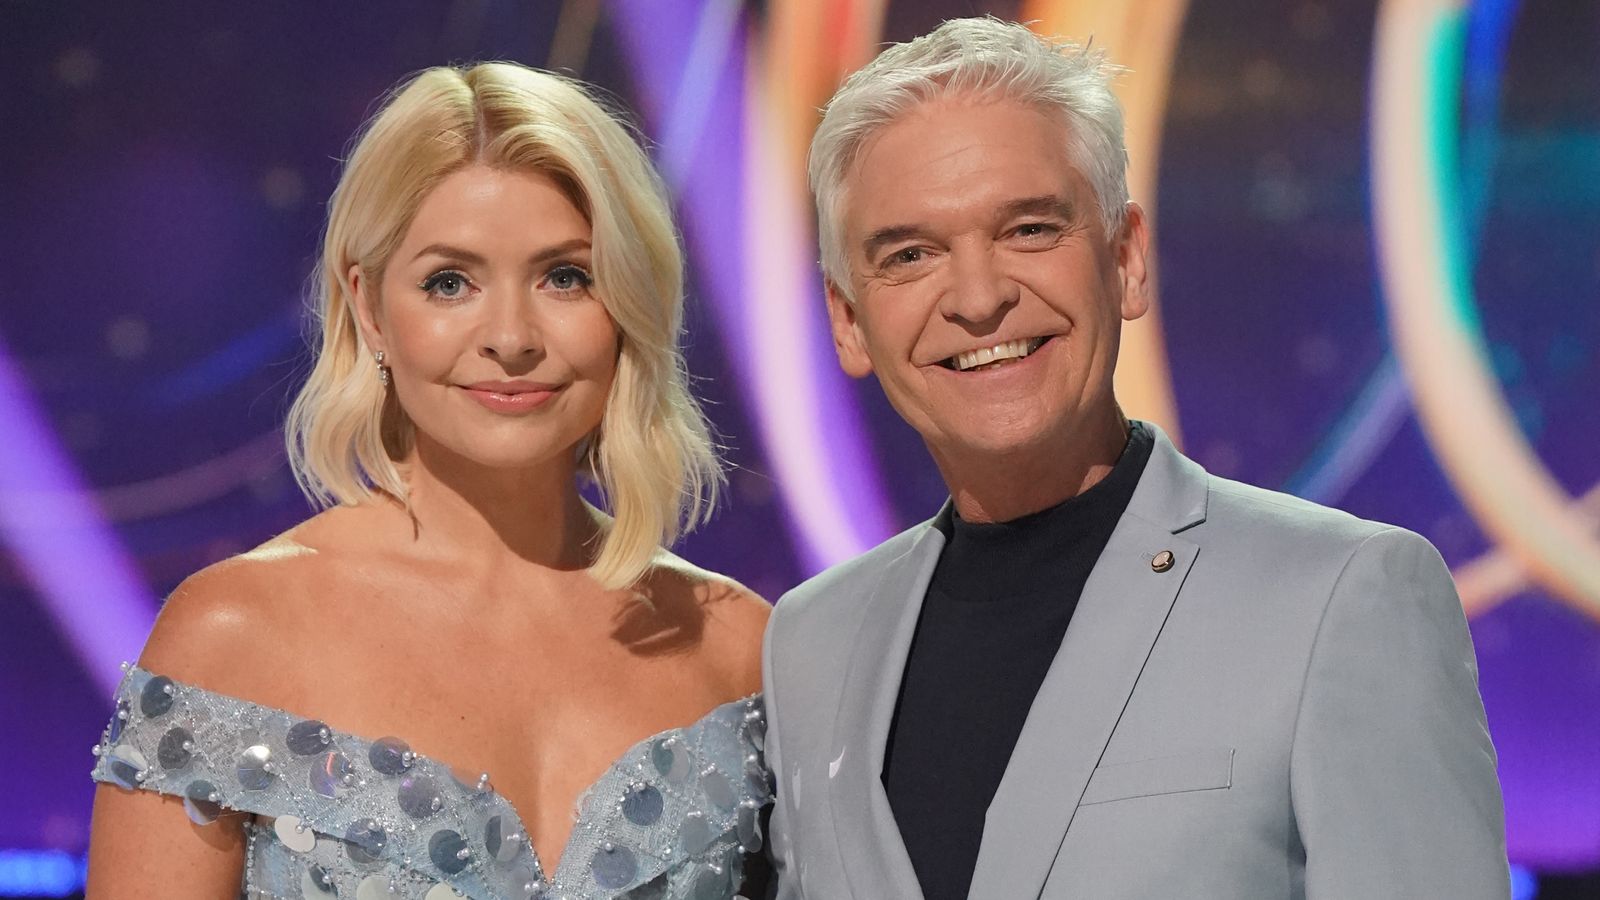 Phillip Schofield Timeline Of Itv Departure After Colleague Affair And Holly Willoughby Rift